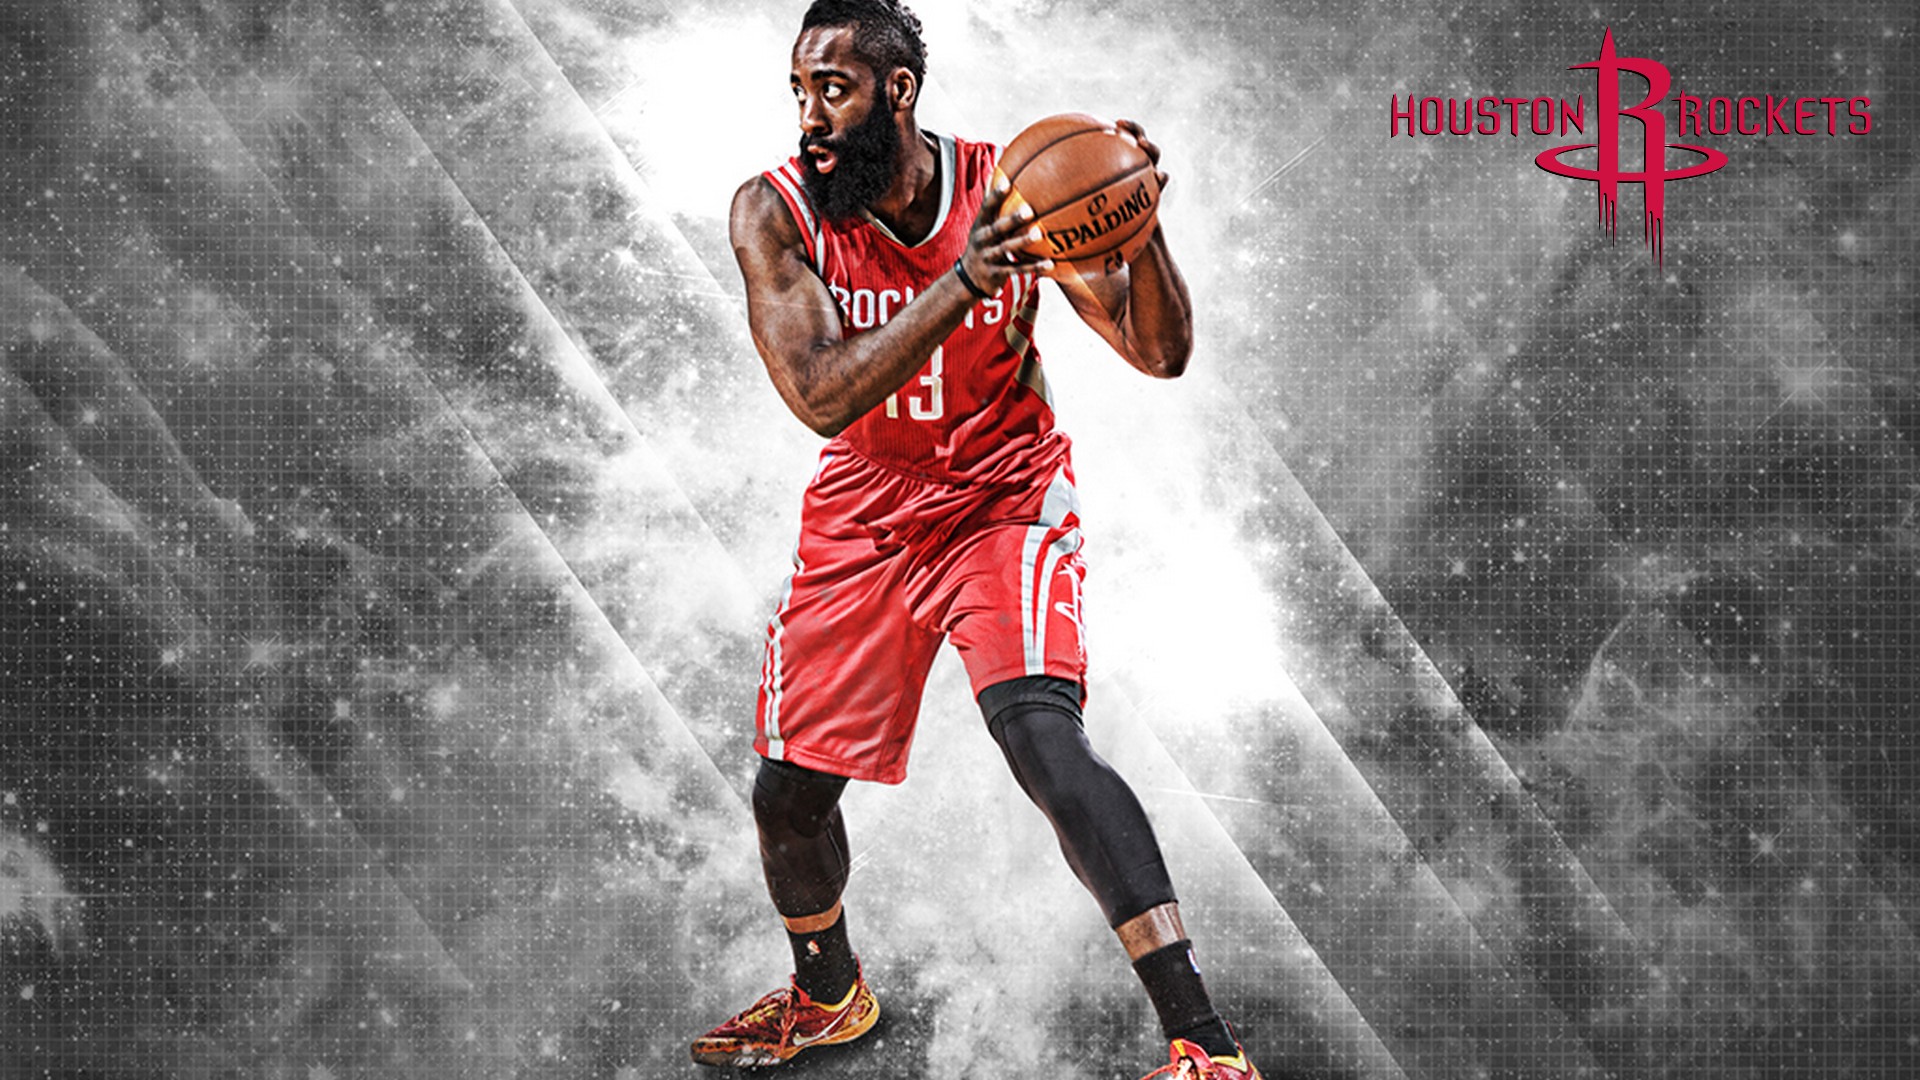 James Harden Beard Wallpaper HD with image dimensions 1920x1080 pixel. You can make this wallpaper for your Desktop Computer Backgrounds, Windows or Mac Screensavers, iPhone Lock screen, Tablet or Android and another Mobile Phone device